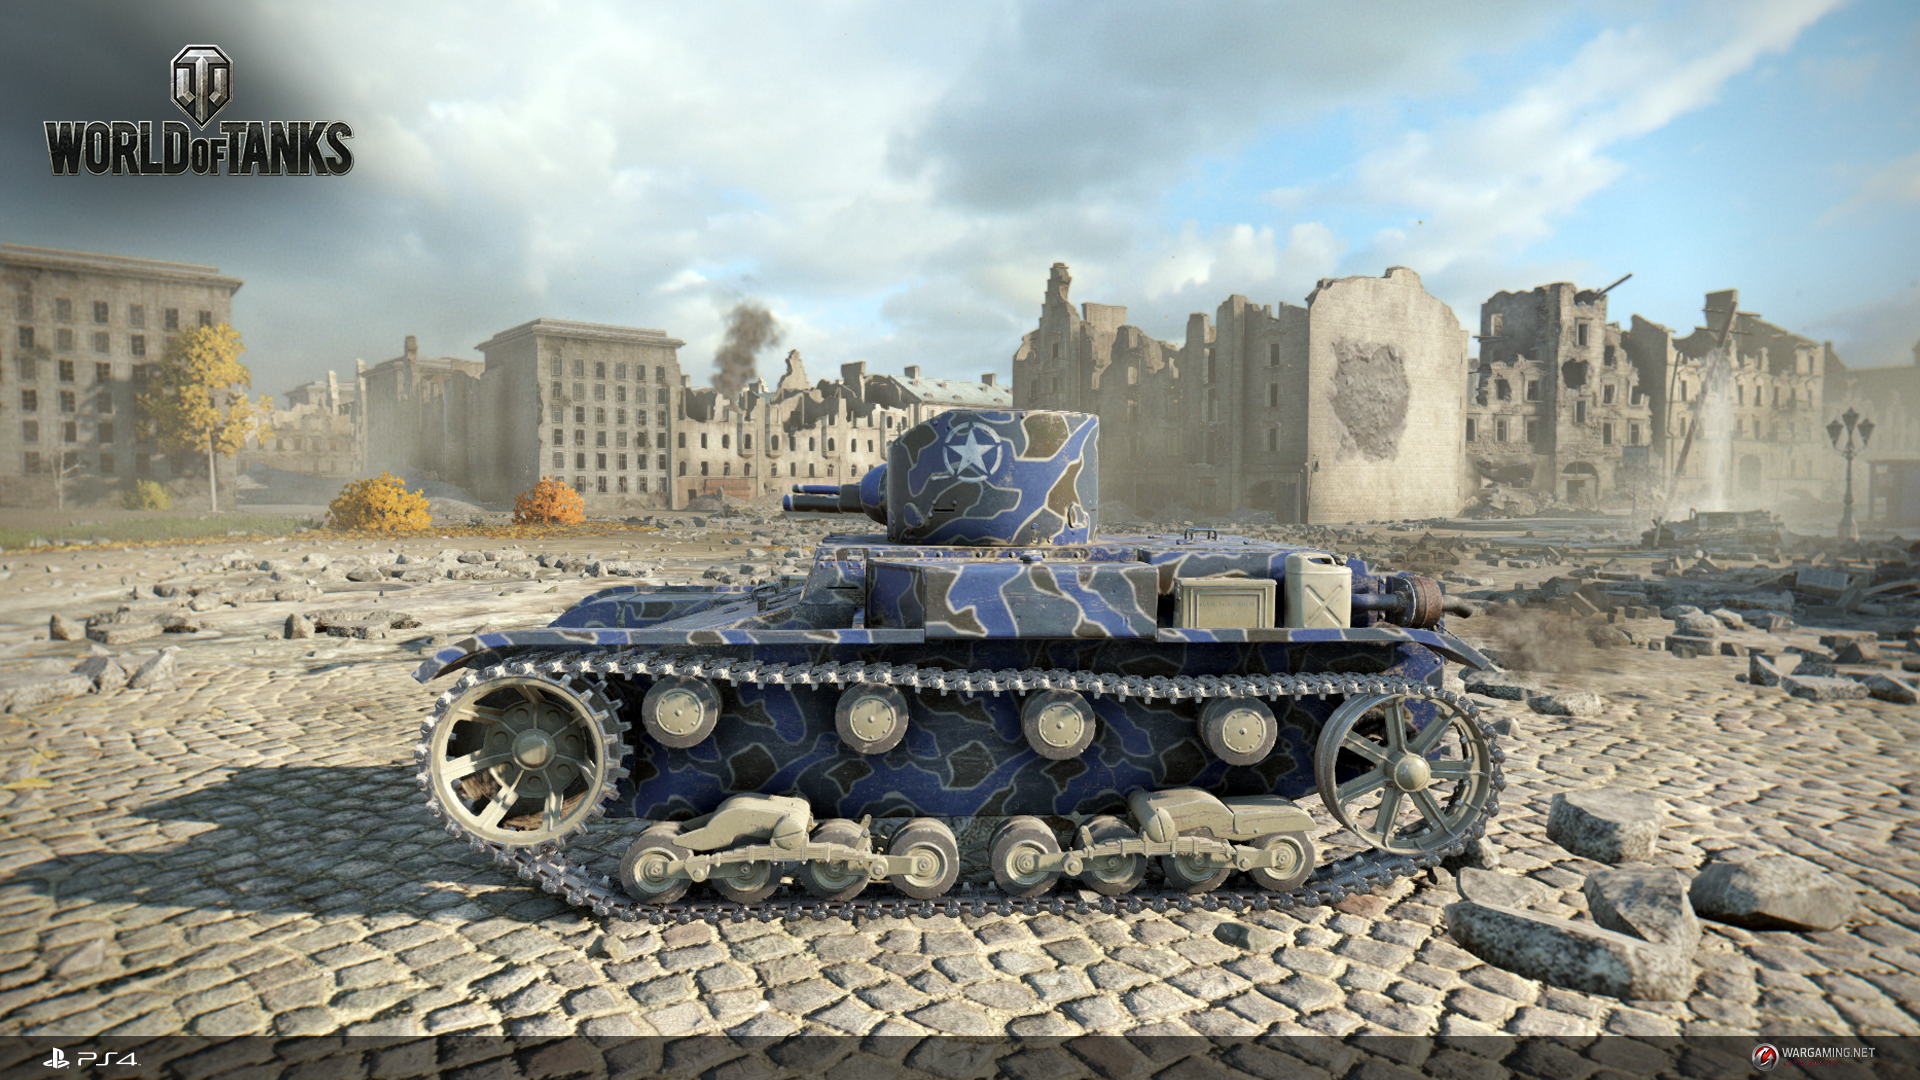 World of War Tanks for ipod instal